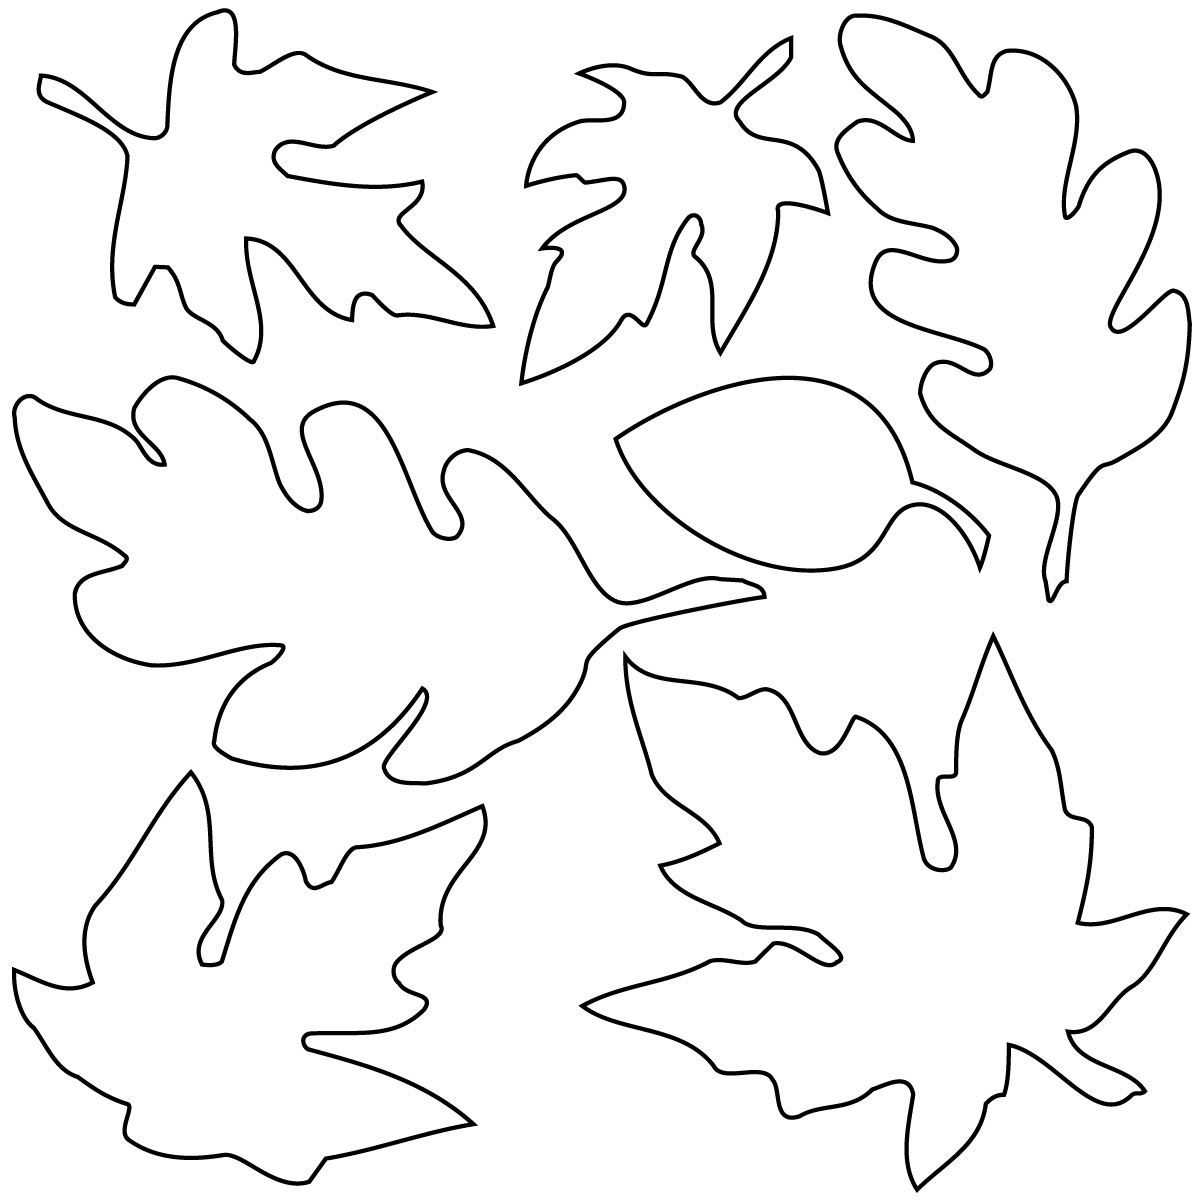 Clip Art  Fall Leaves  Coloring Page    Abcteach